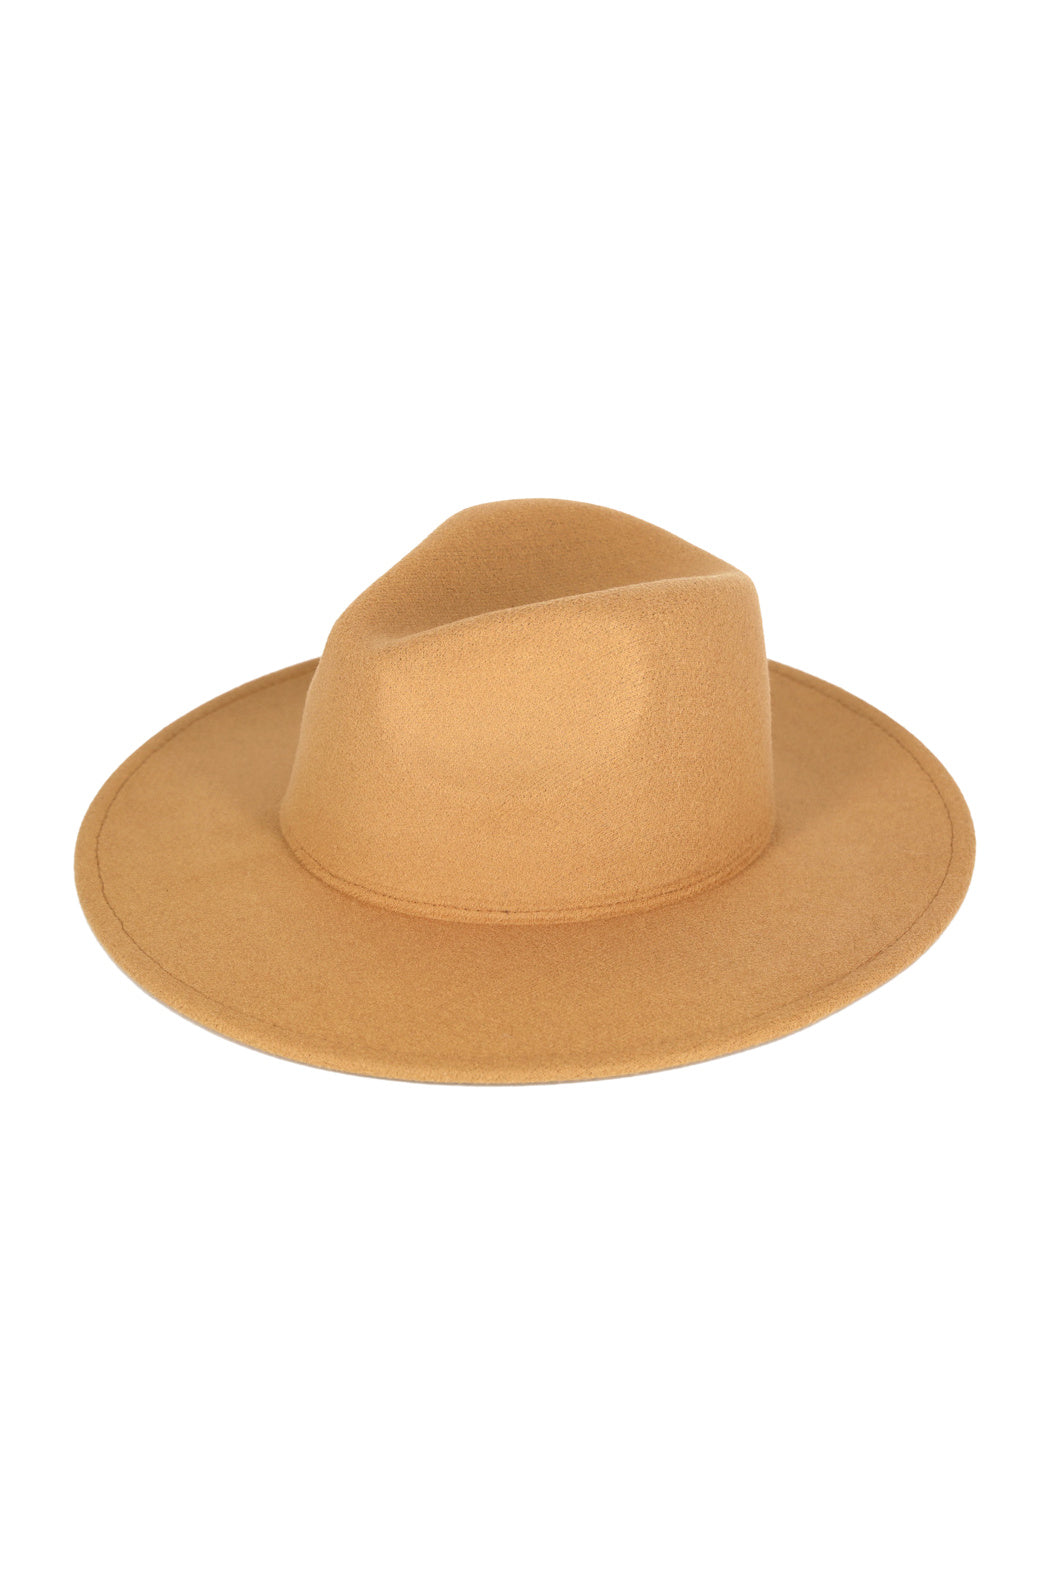 Your Way Felt Fedora - available in 10 colors